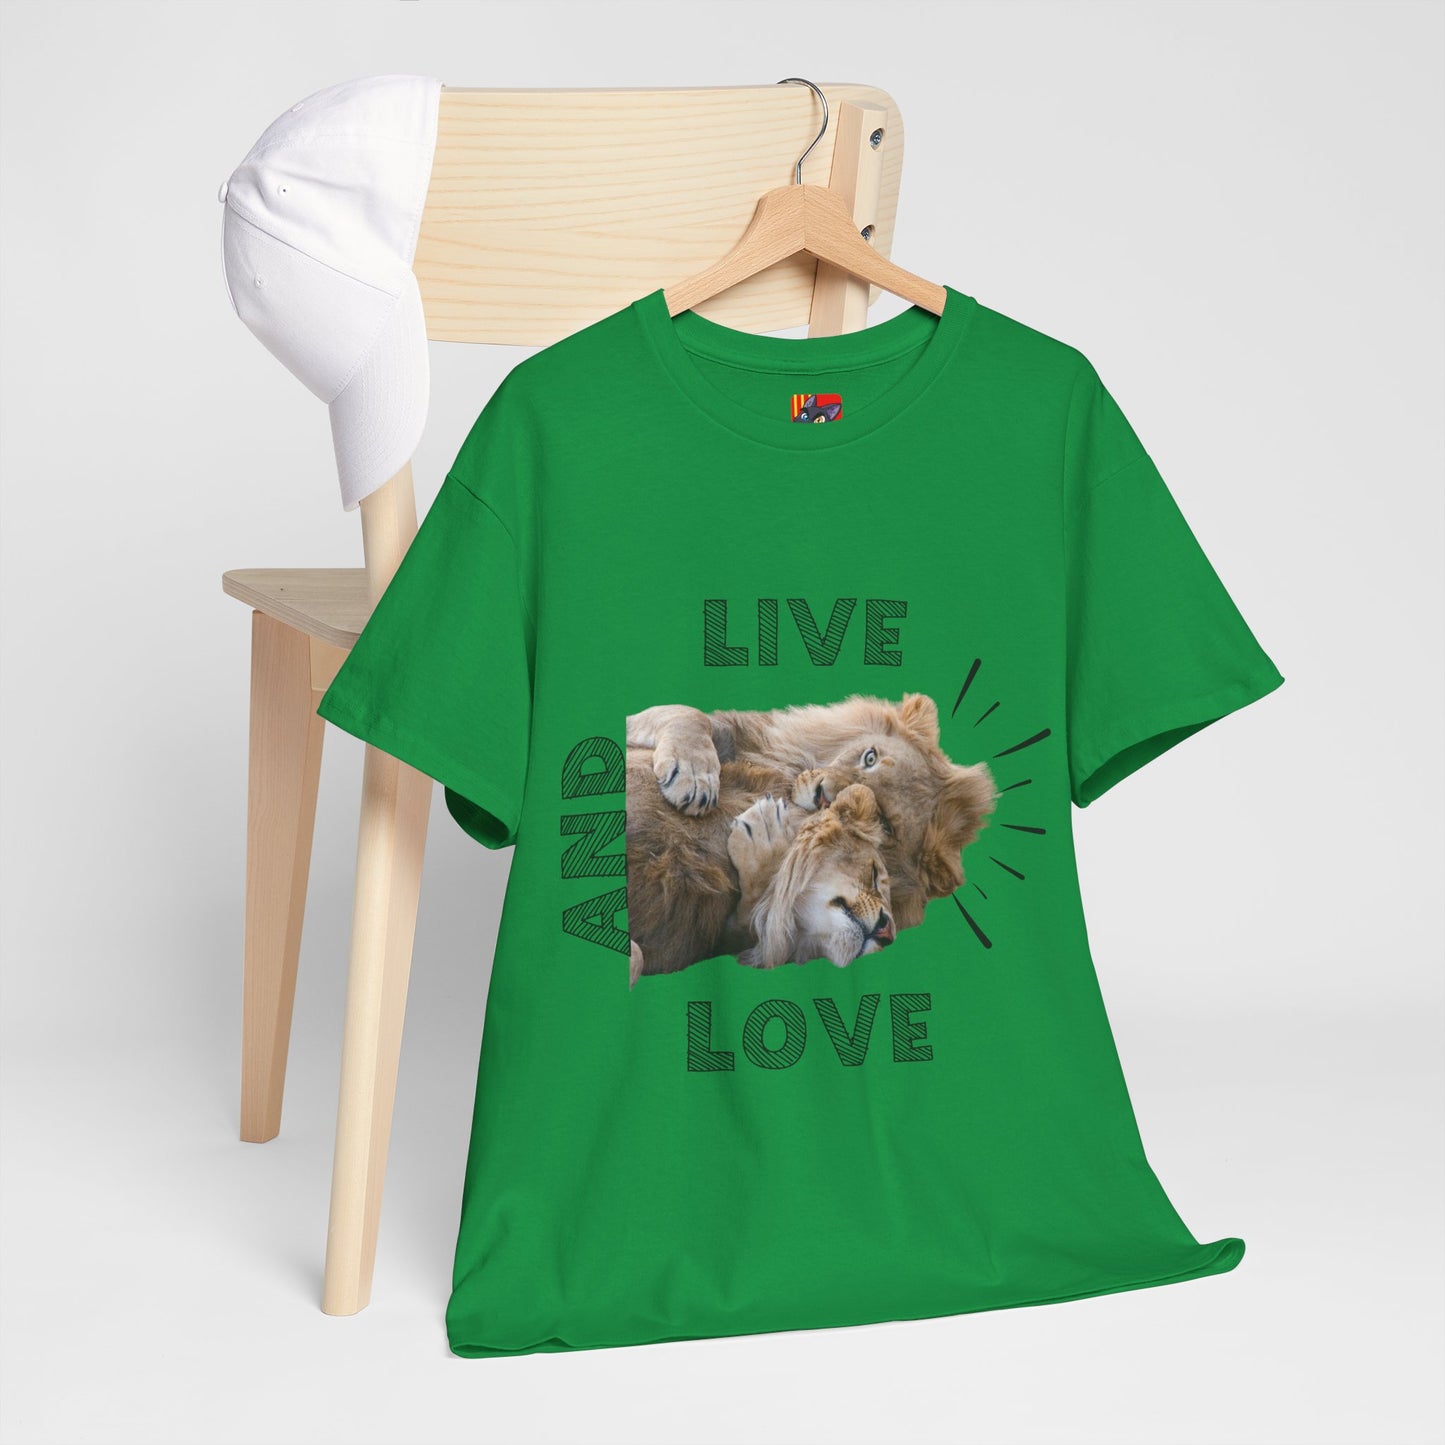 Live and Love: Simple Quote Tee